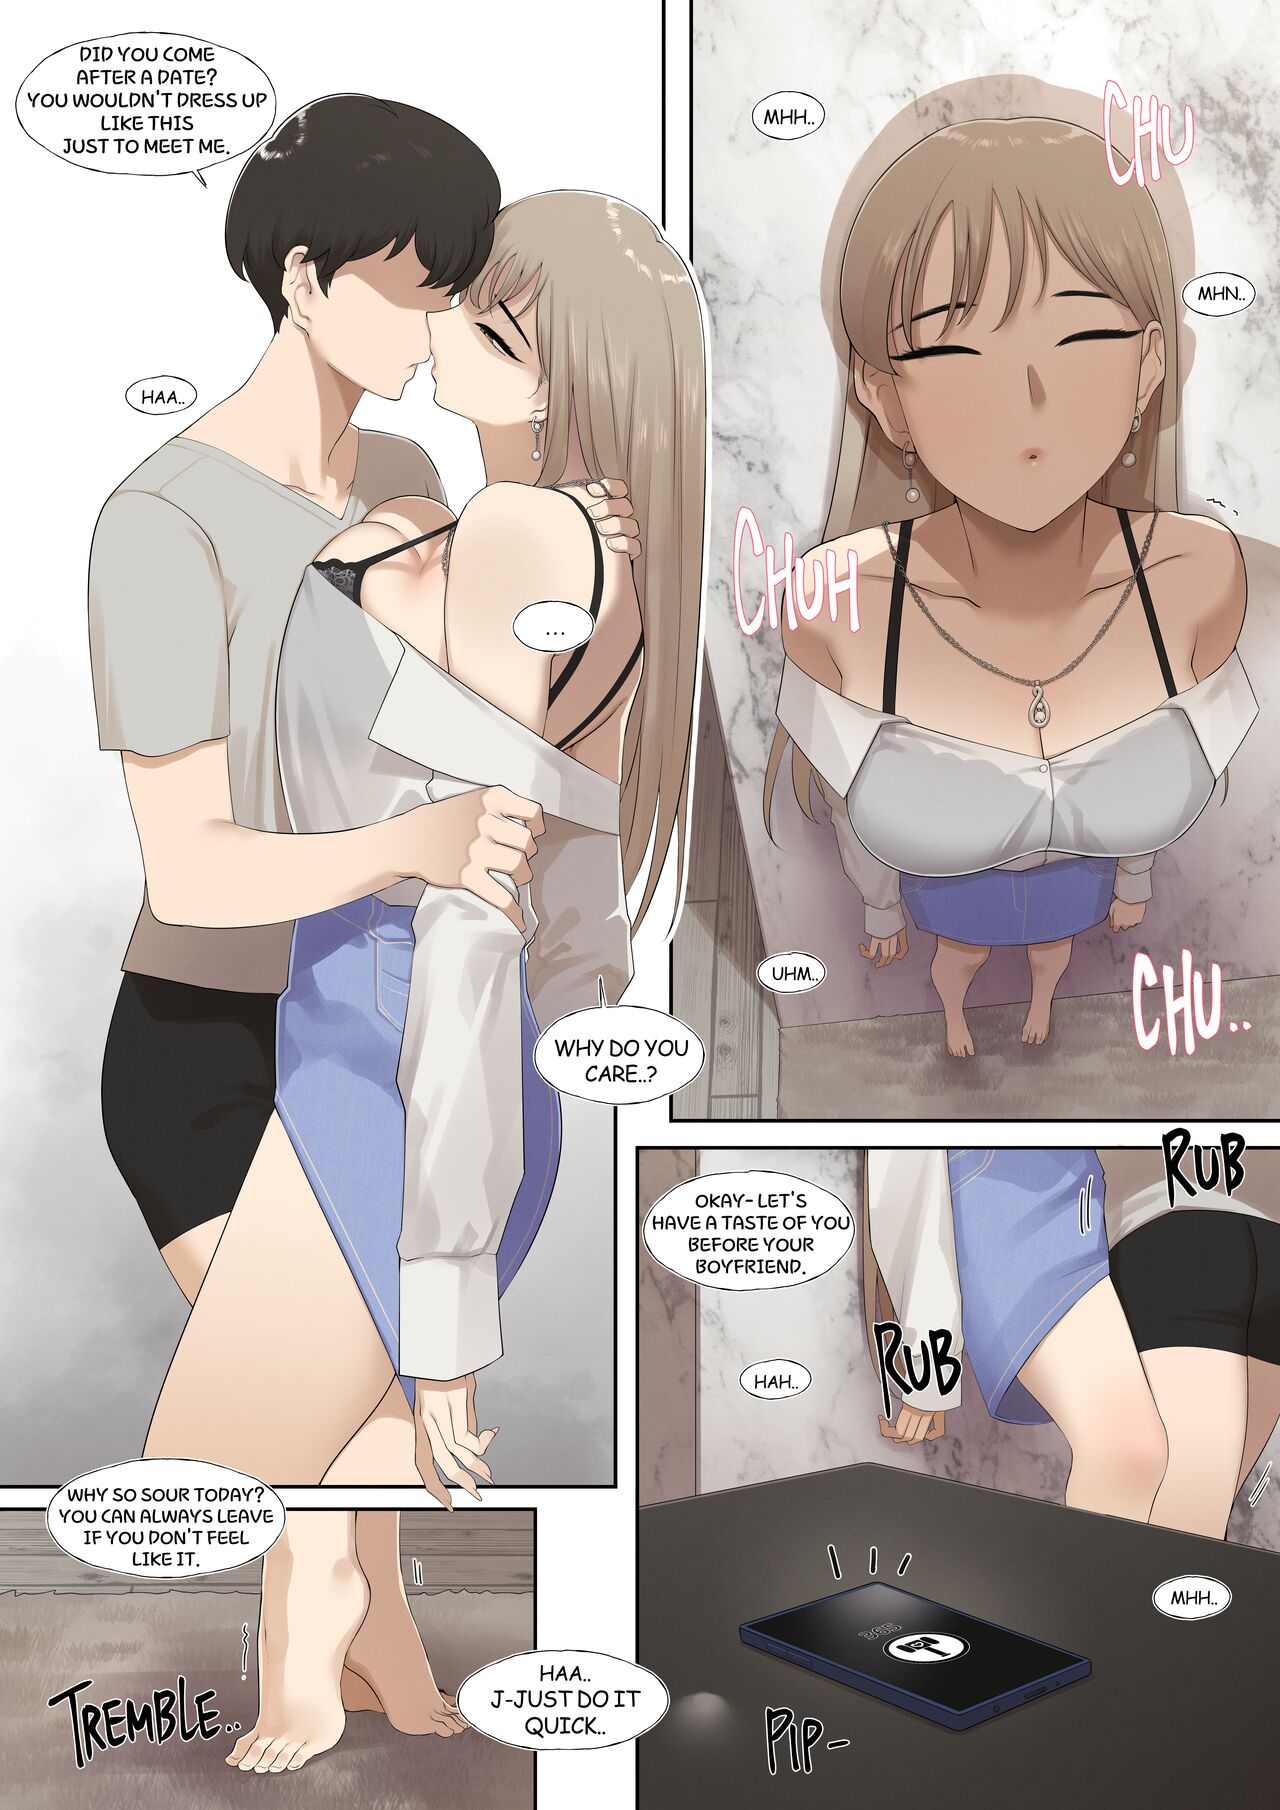 Bf Secse - Common sense alteration â€“ A world one can be forgiven with mating [ABBB] -  1 . Common sense alteration - A world one can be forgiven with mating -  Chapter 1 [ABBB] - AllPornComic